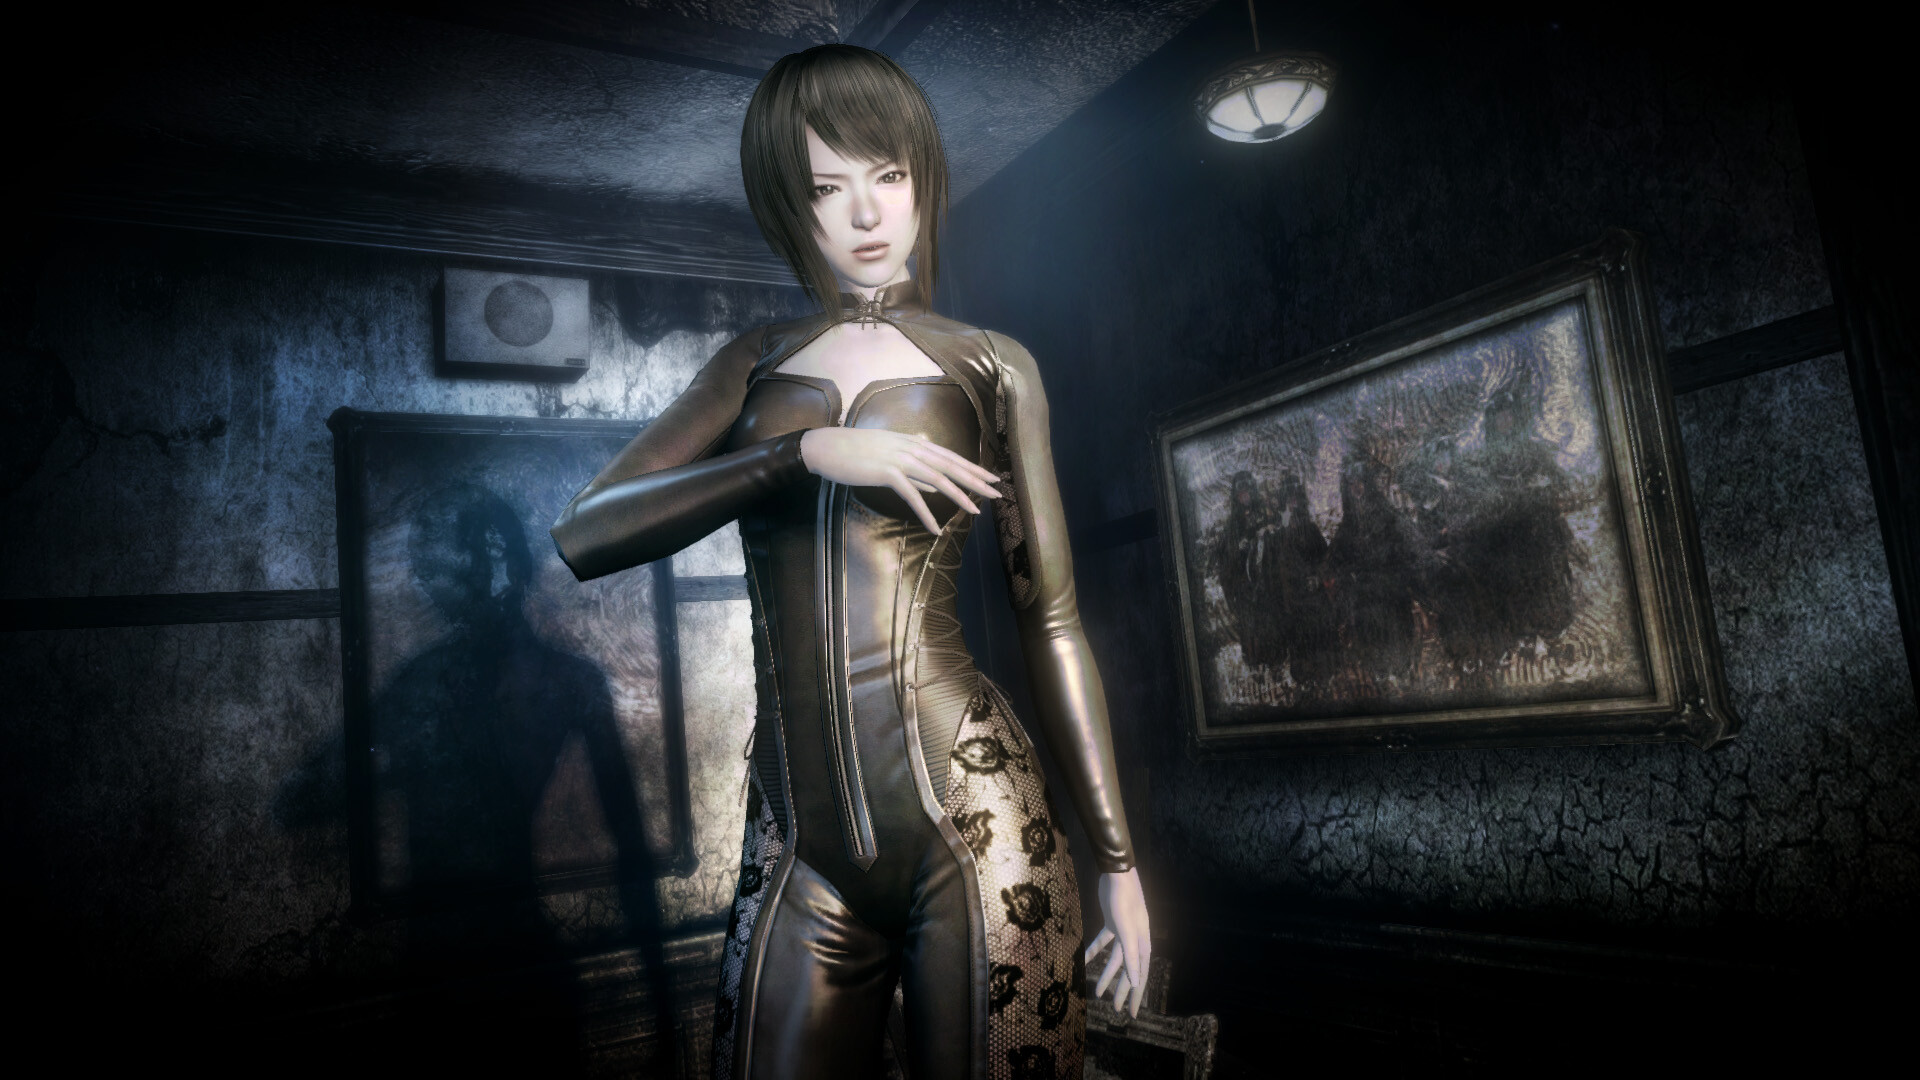 Save 25% on FATAL FRAME / PROJECT ZERO: Mask of the Lunar Eclipse on Steam